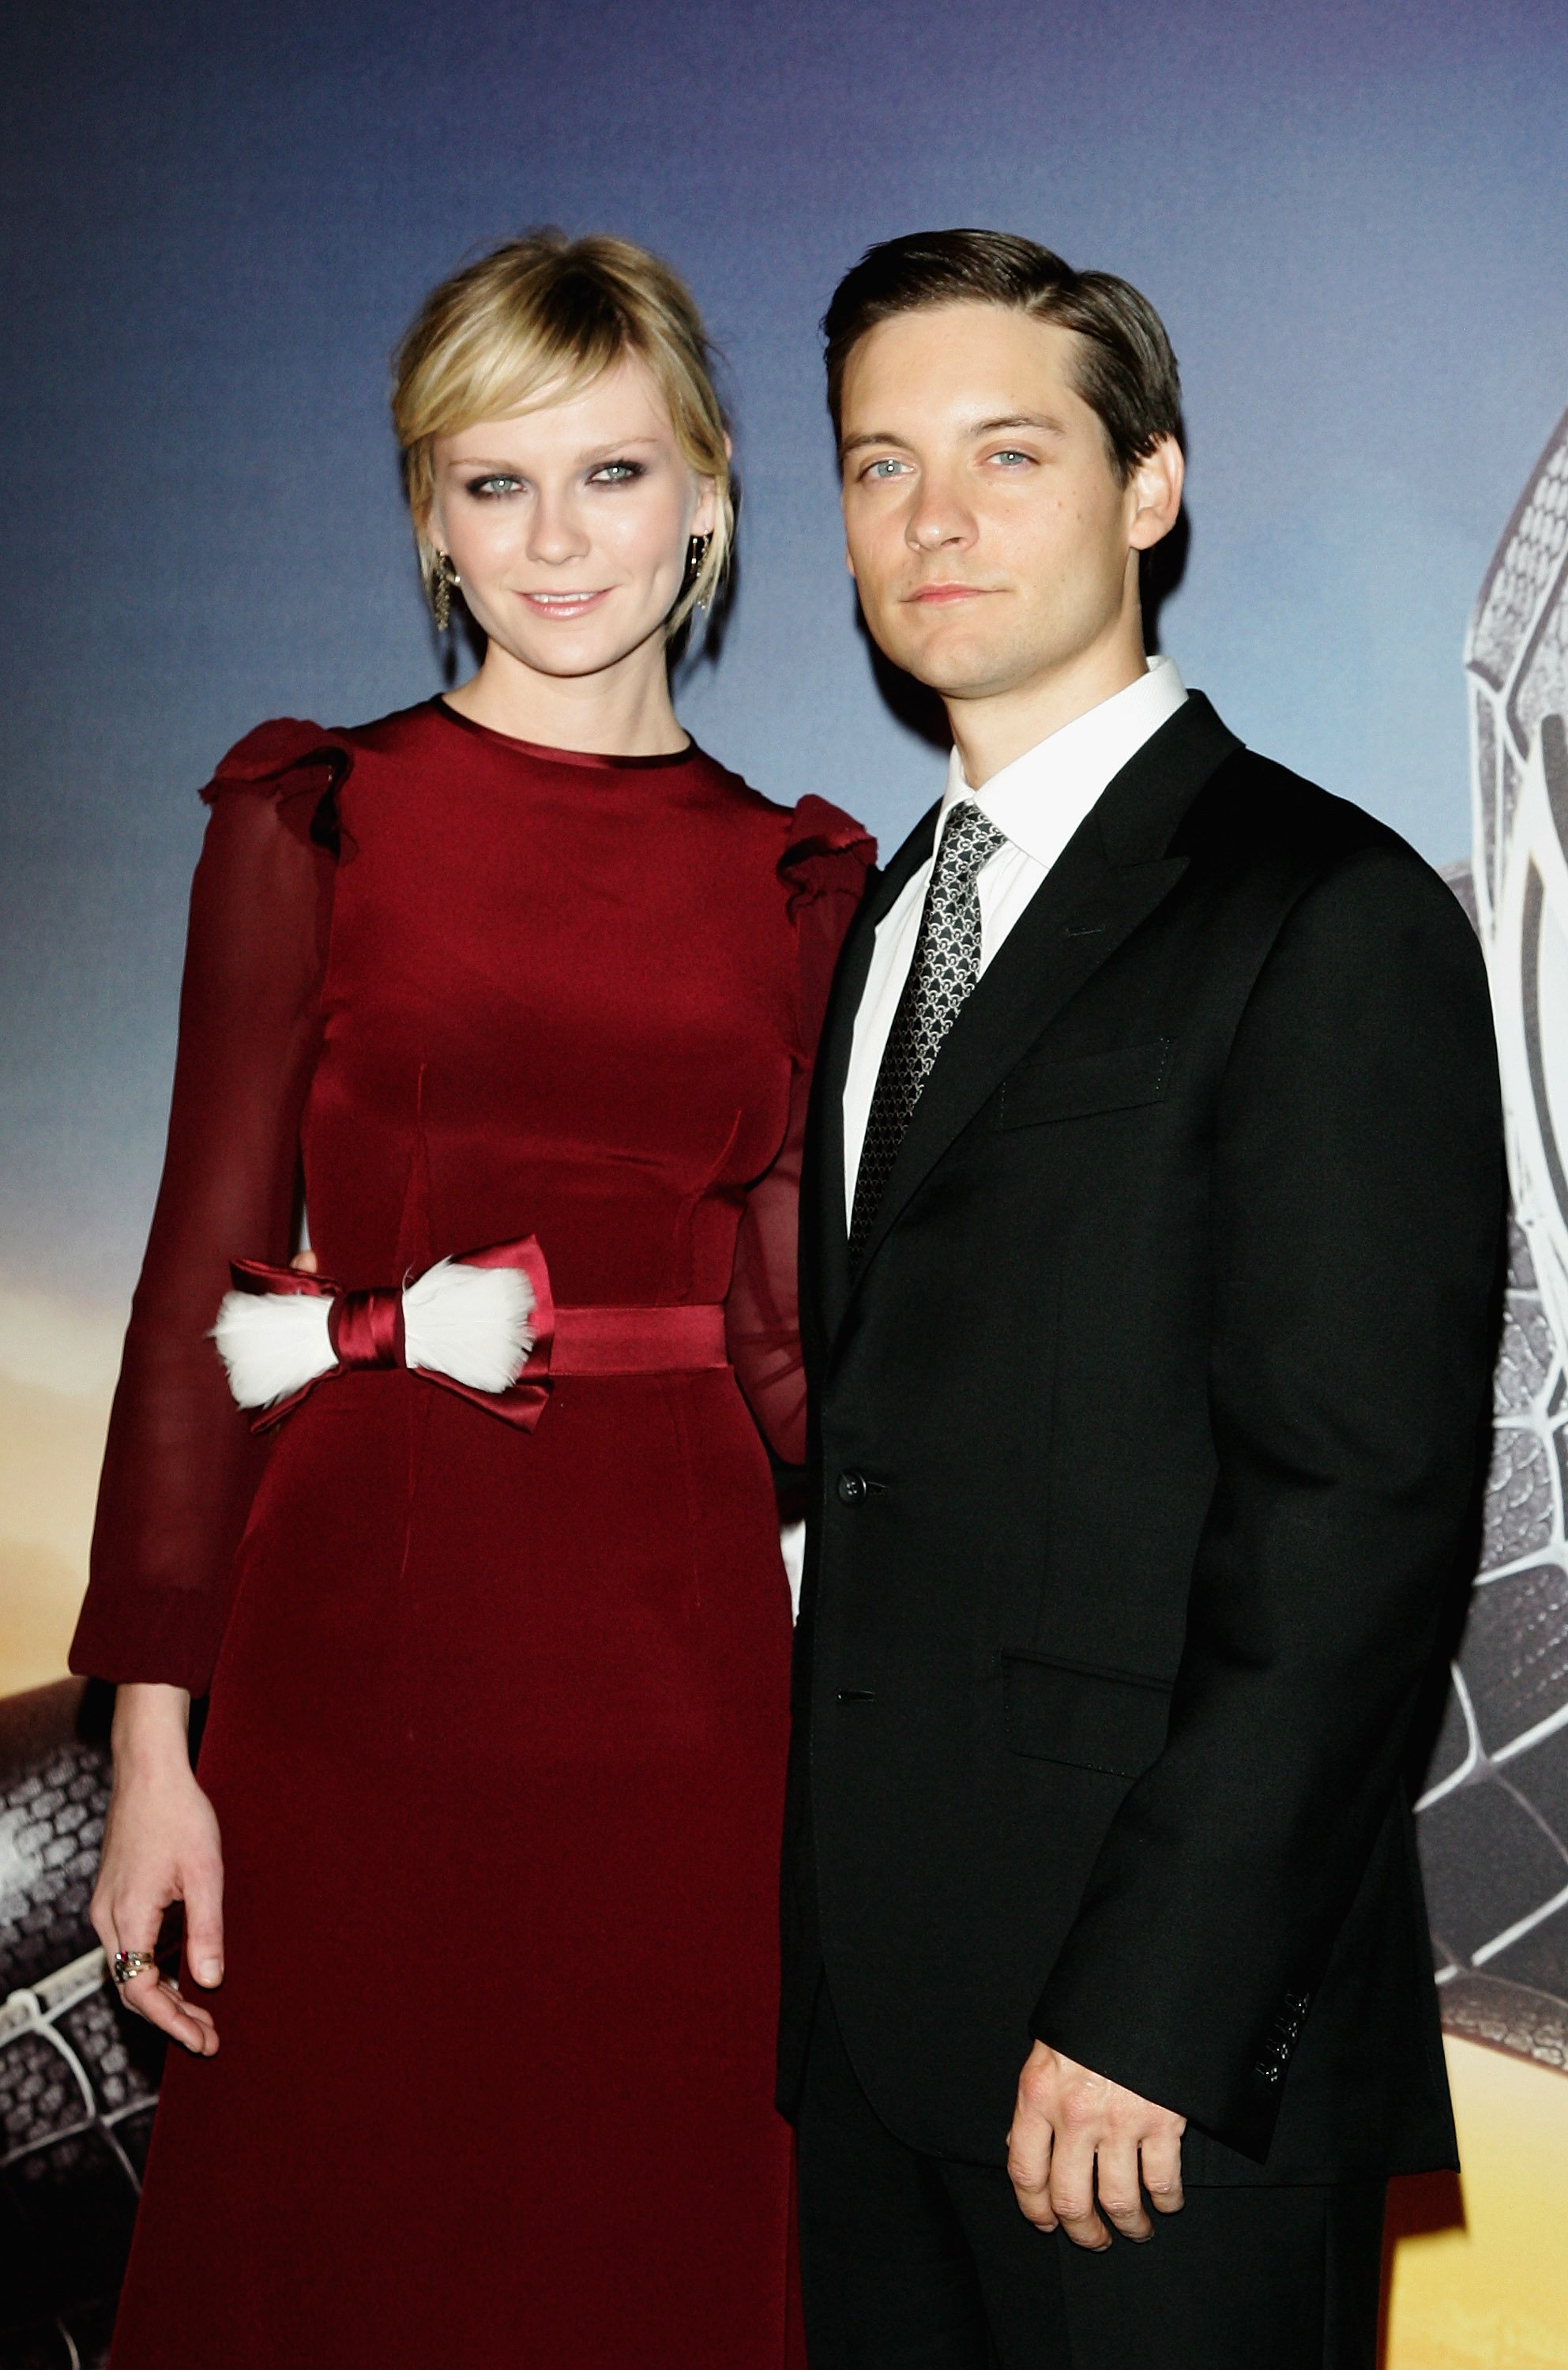 Kirsten Dunst and Tobey Maguire attend the "Spider-Man 3" premiere on April 27, 2007, in Paris, France. | Source: Getty Images